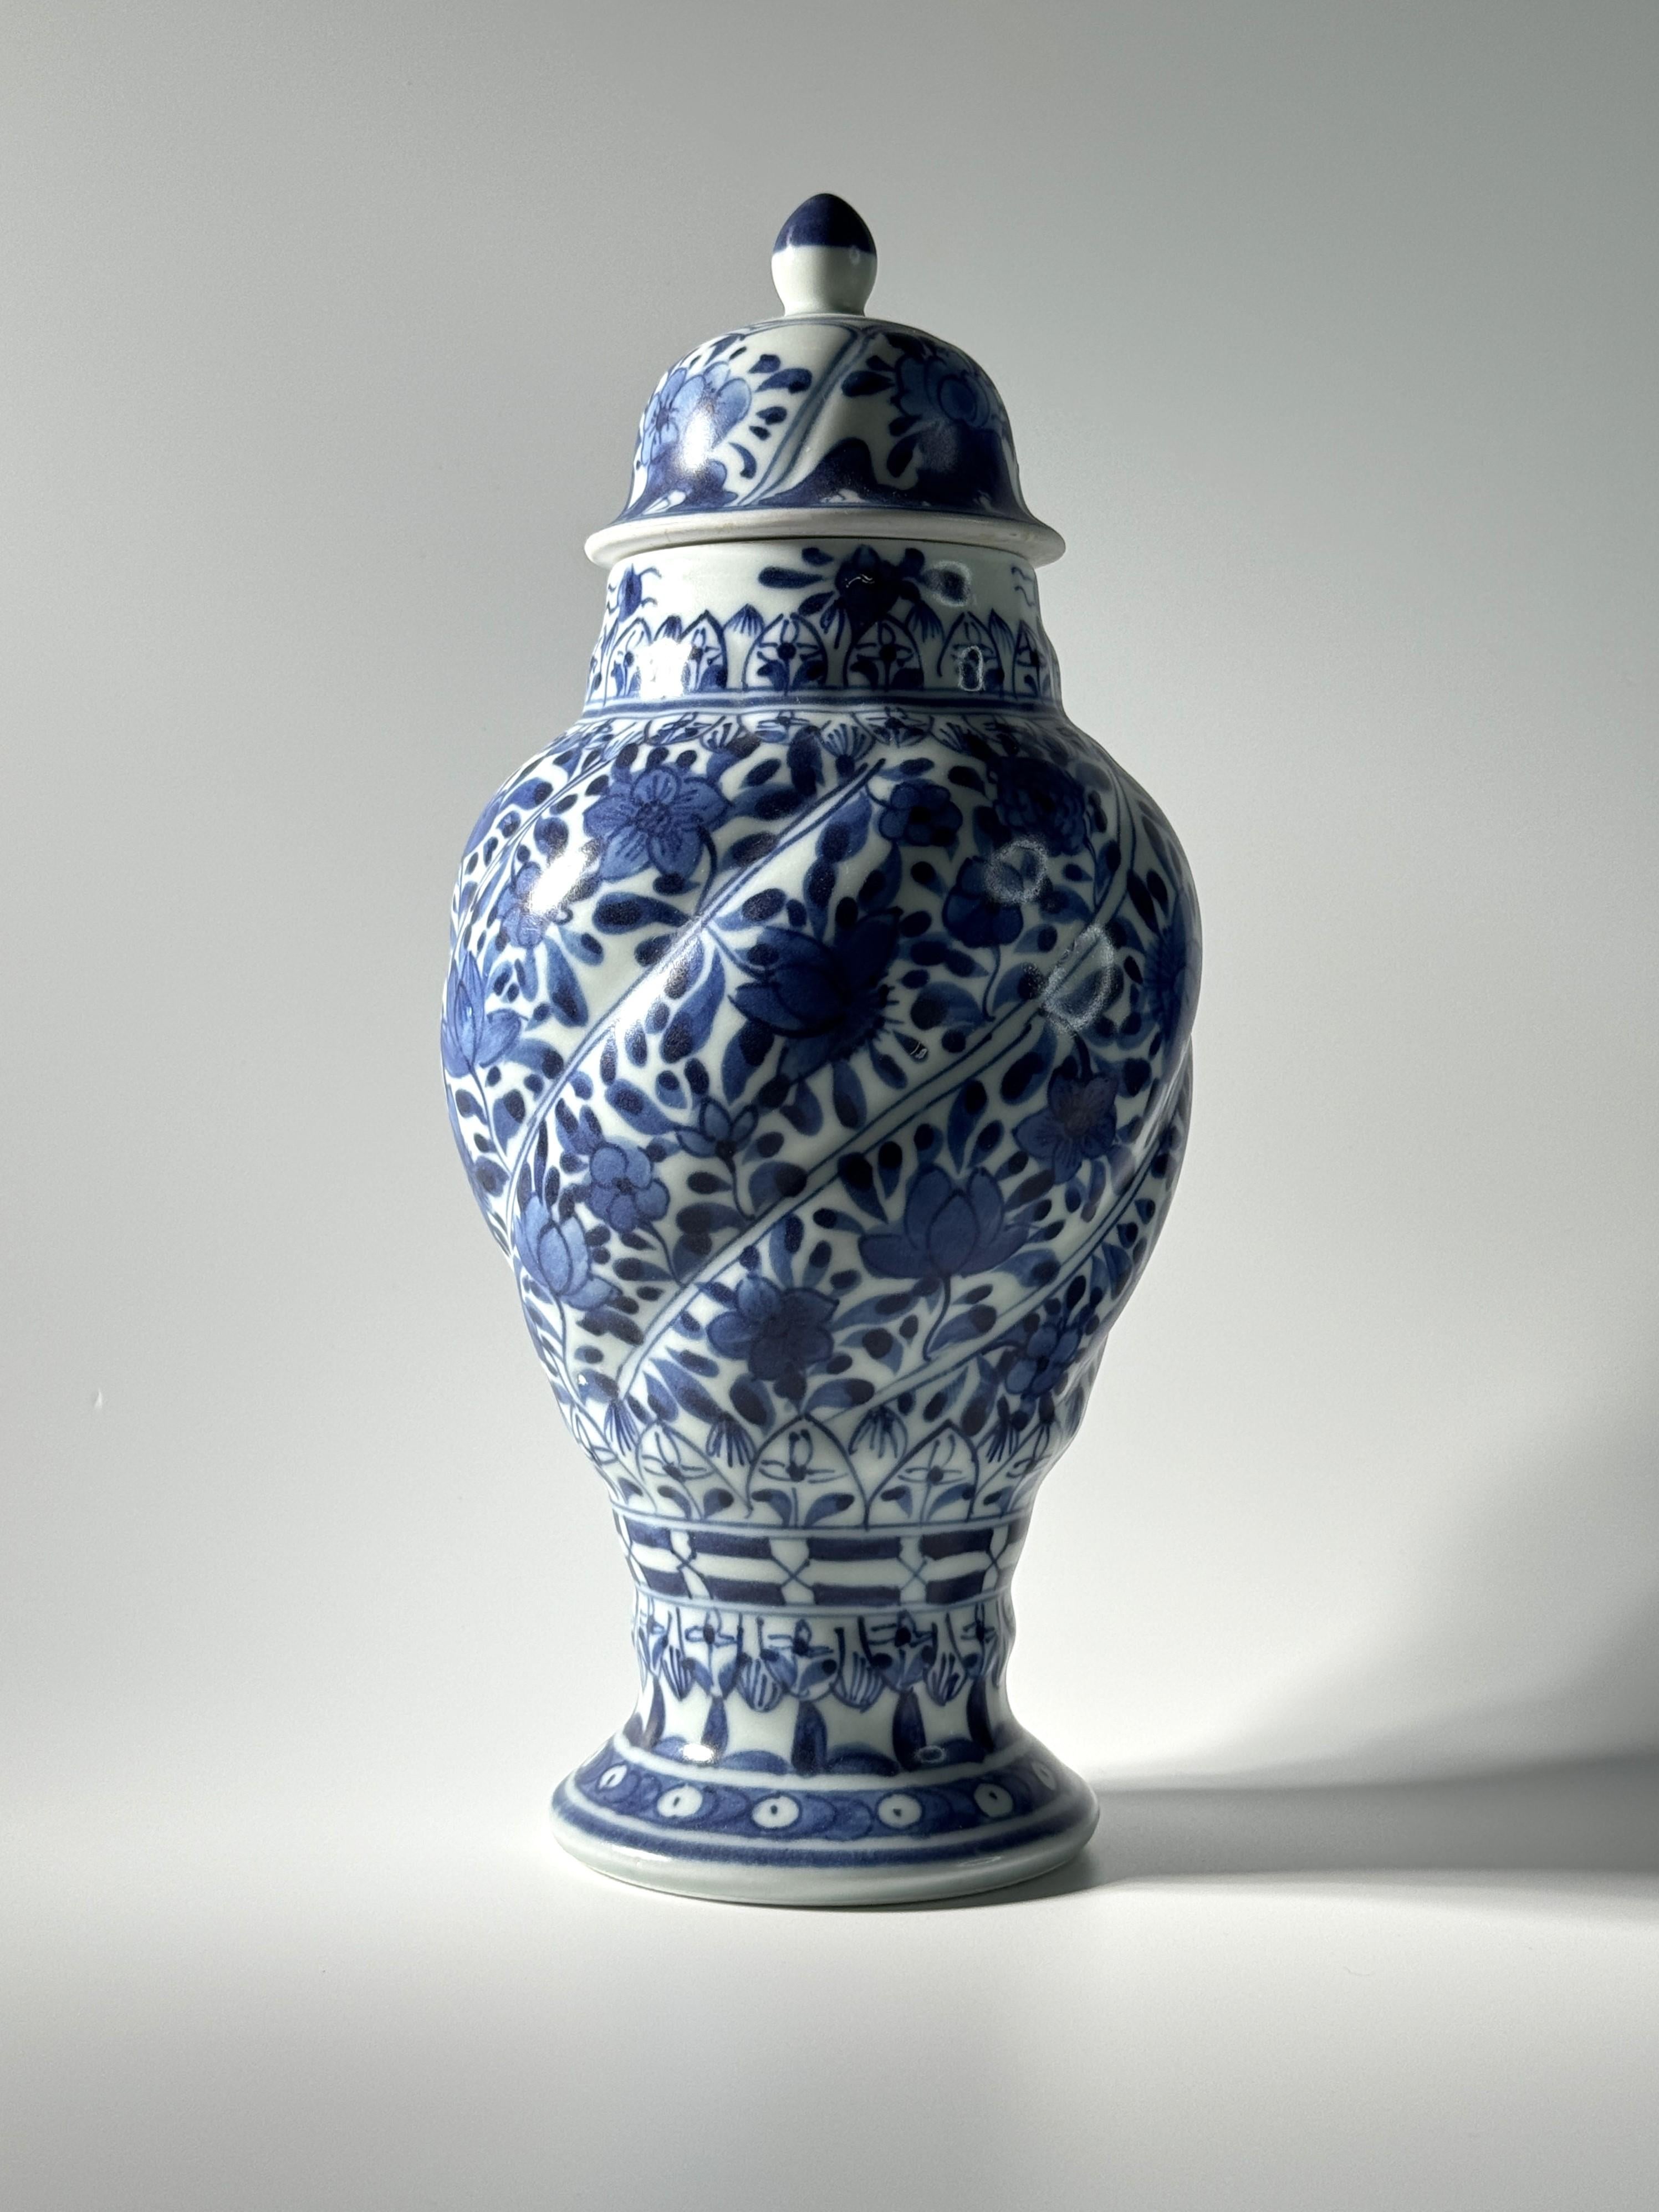 The vase and cover are decorated with flowers and foliage within each spiral band. The body of the vase tapers from the top to the bottom. This piece is characterized by a spiral shape and is one of the representative item excavated from the Vung